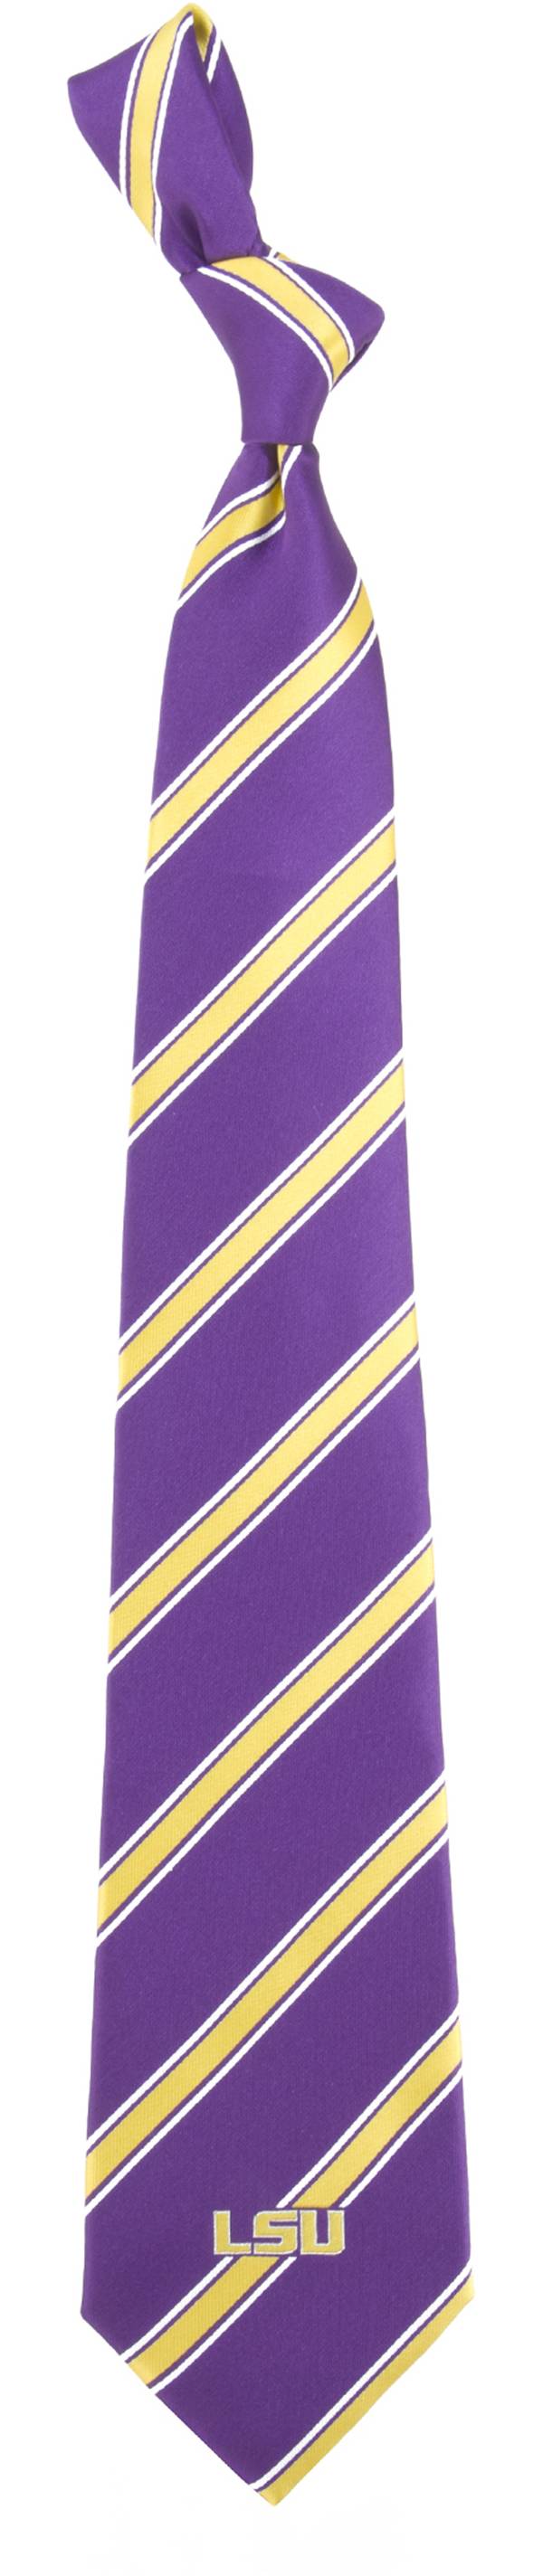 Eagles Wings LSU Tigers Woven Poly 1 Necktie product image